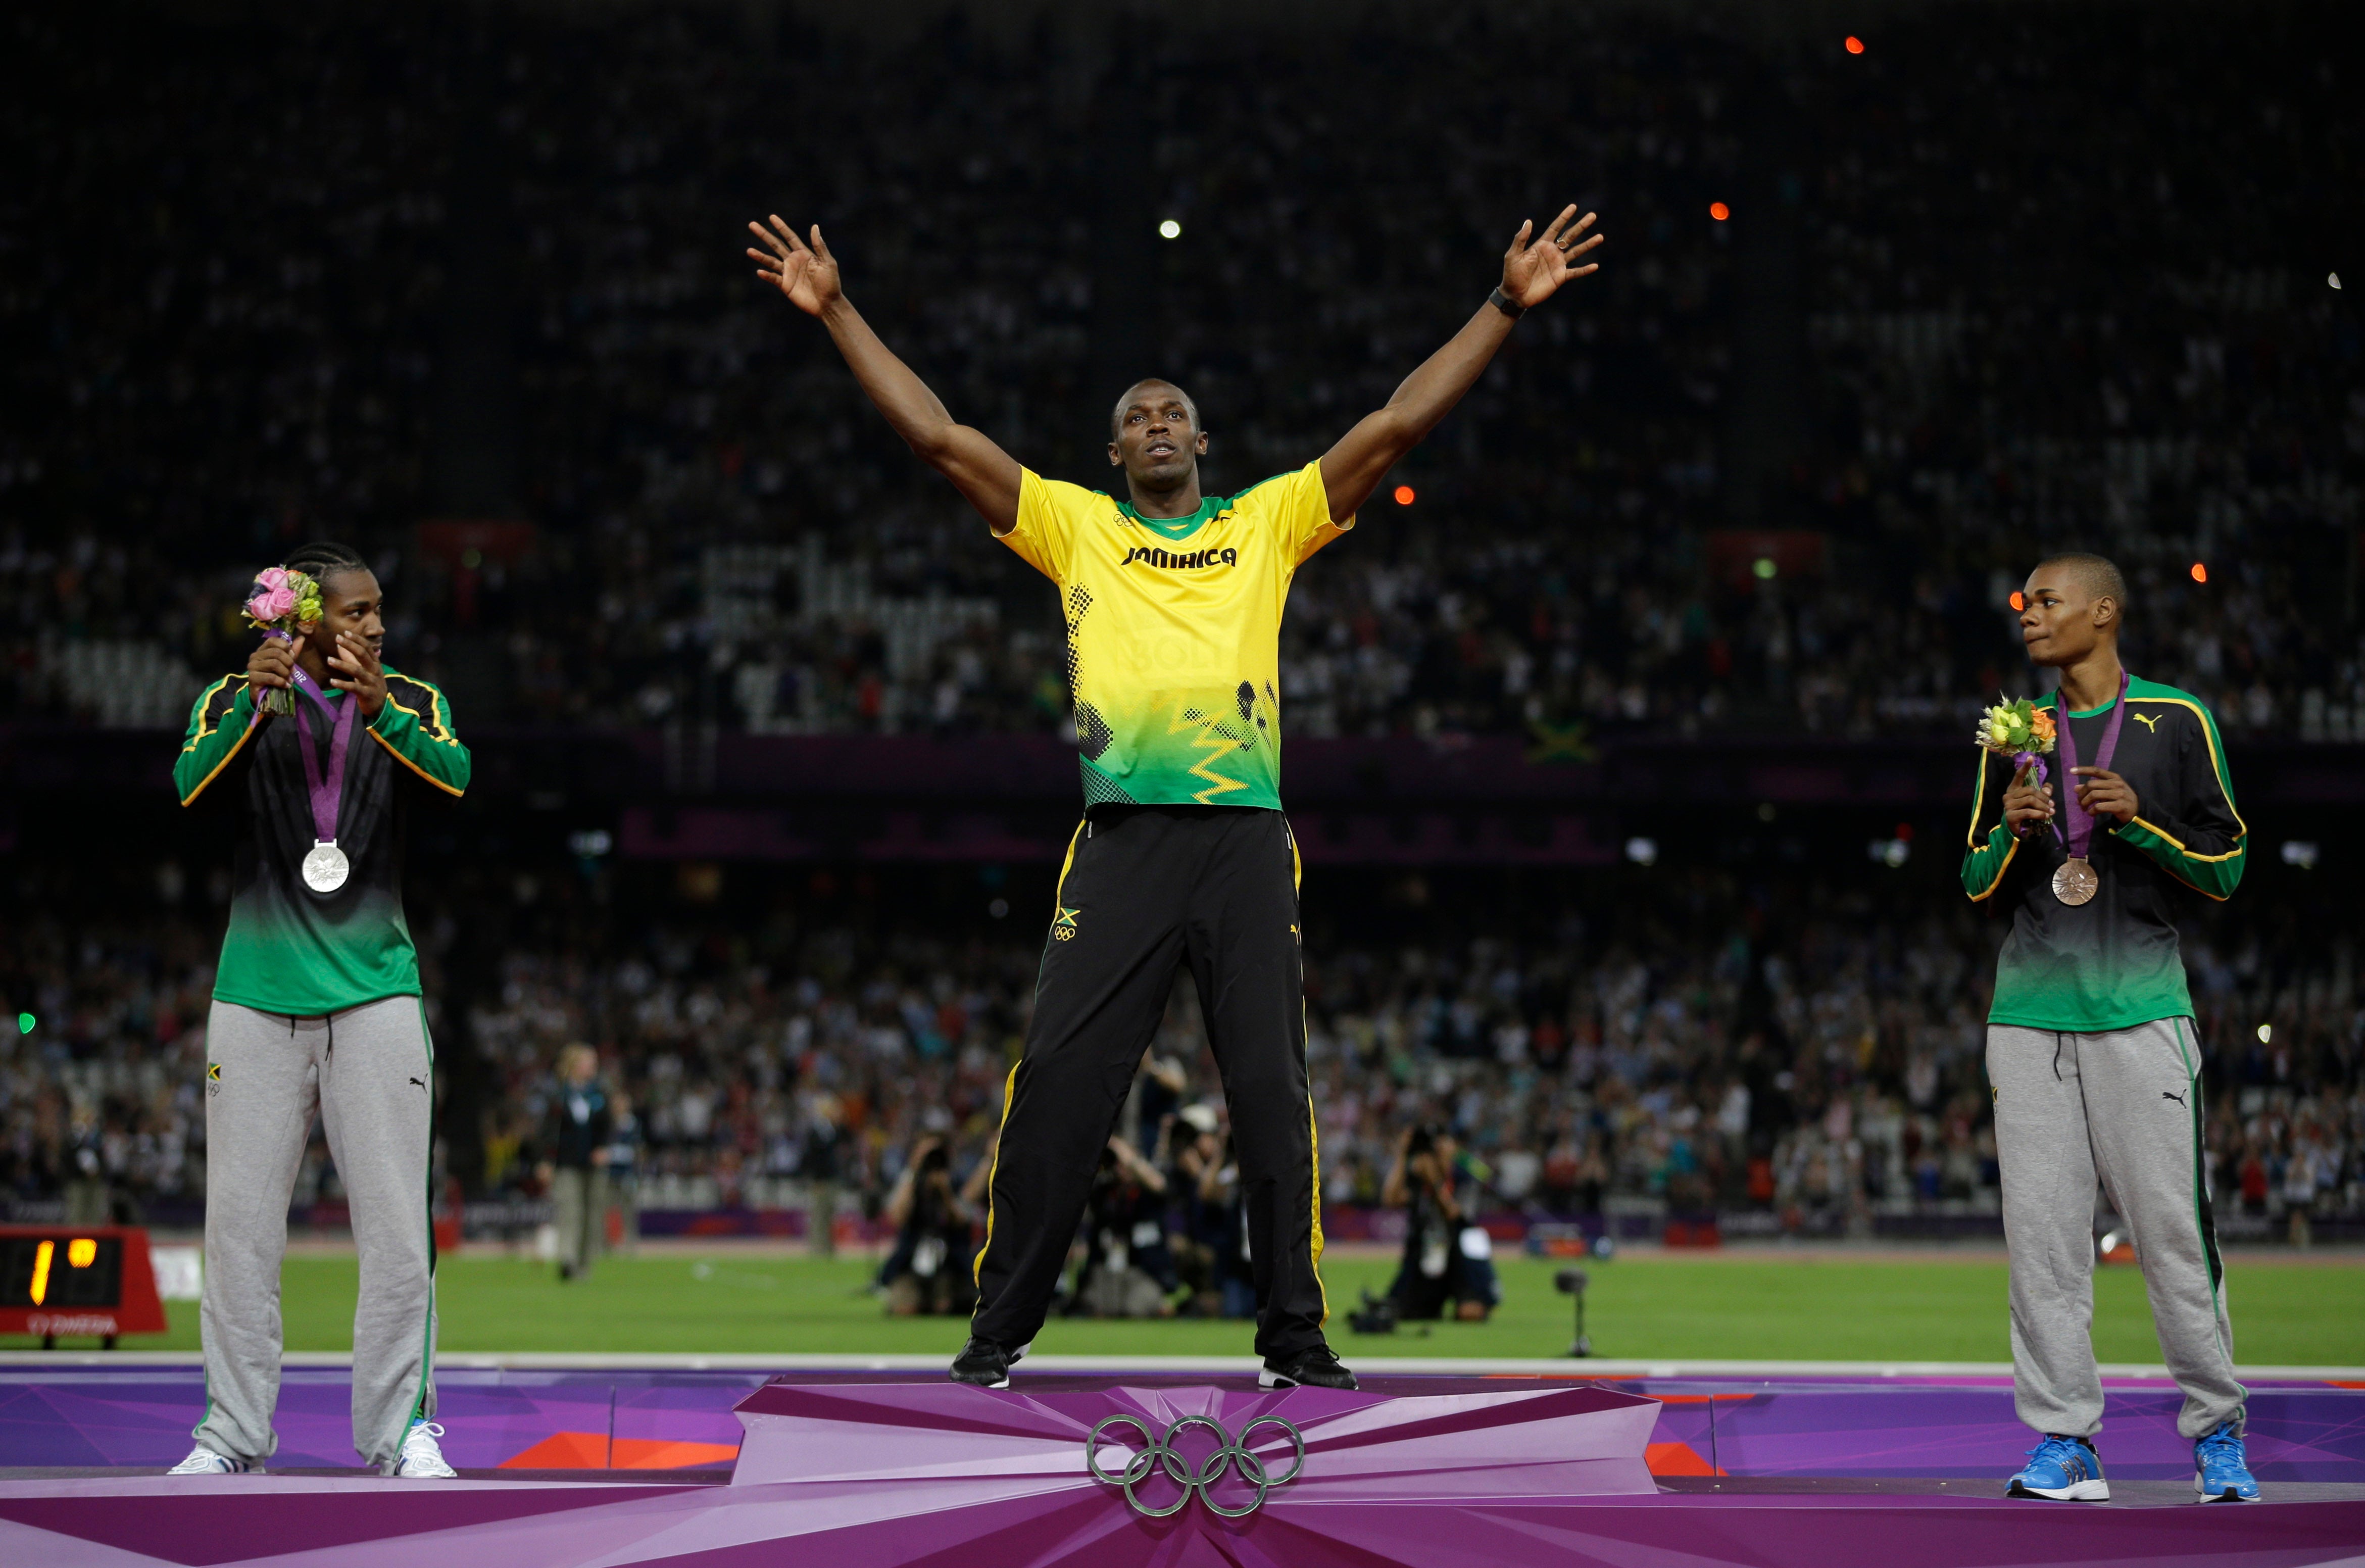 Usain Bolt Wins His Fifth Gold Medal